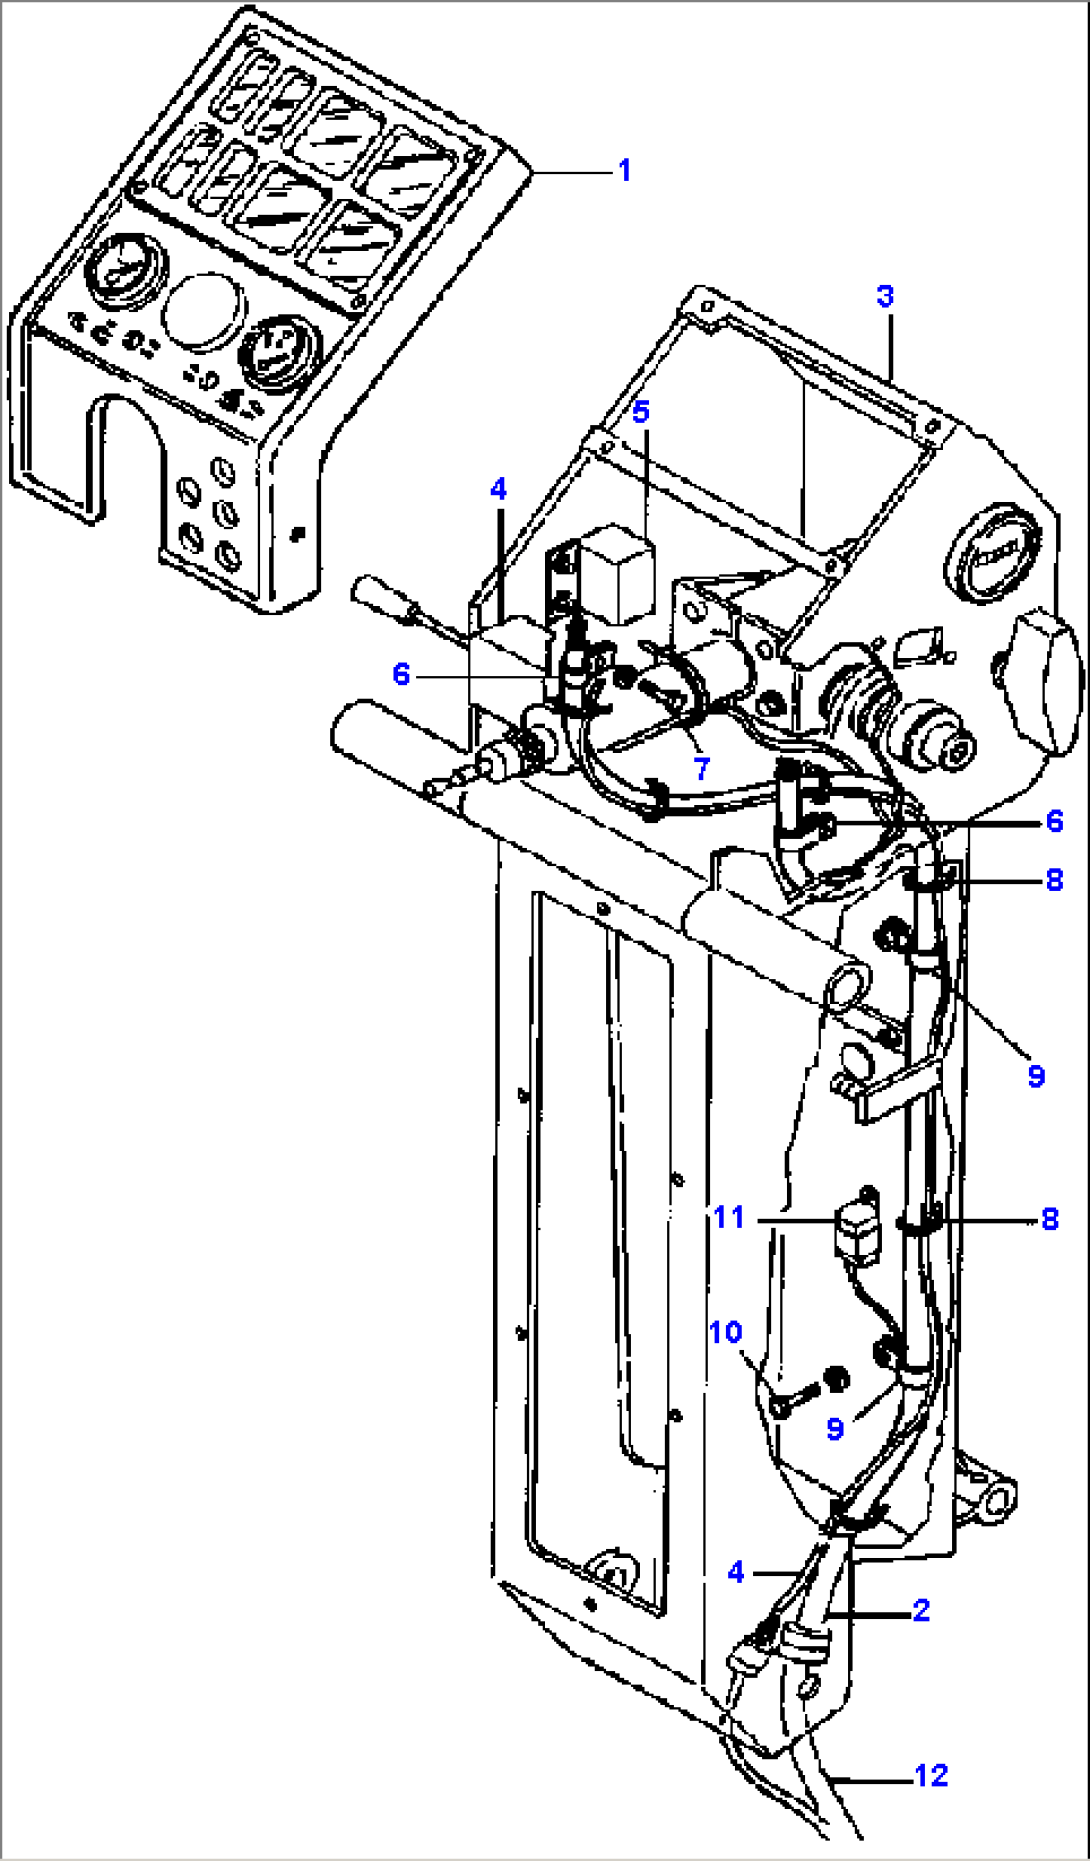 FIG. E5100-01A3 STEERING CONSOLE WIRING